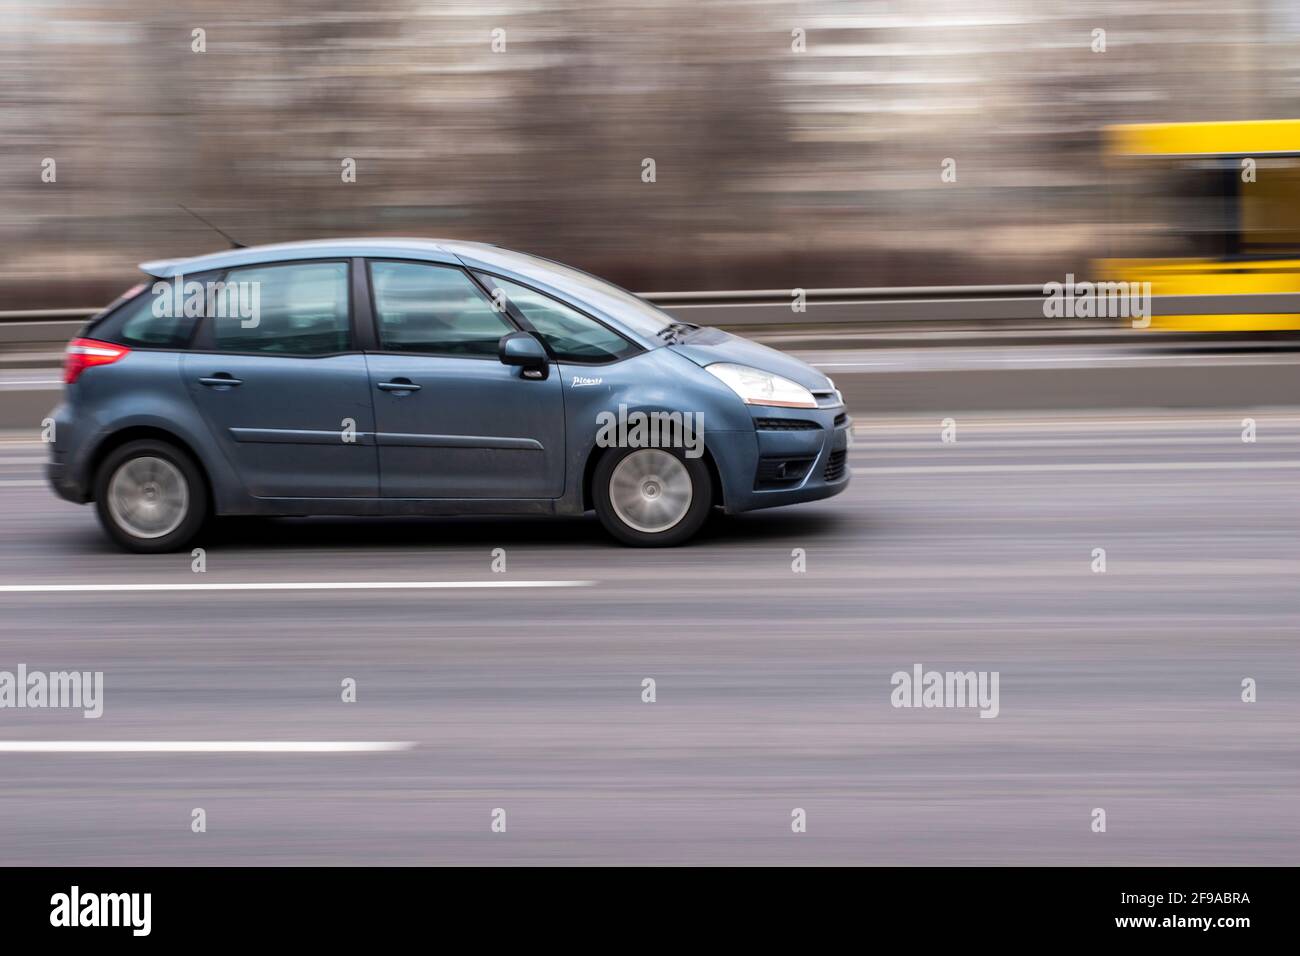 Ukraine, Kyiv - 18 March 2021: Blue Citroen C4 Picasso car moving on the street. Editorial Stock Photo